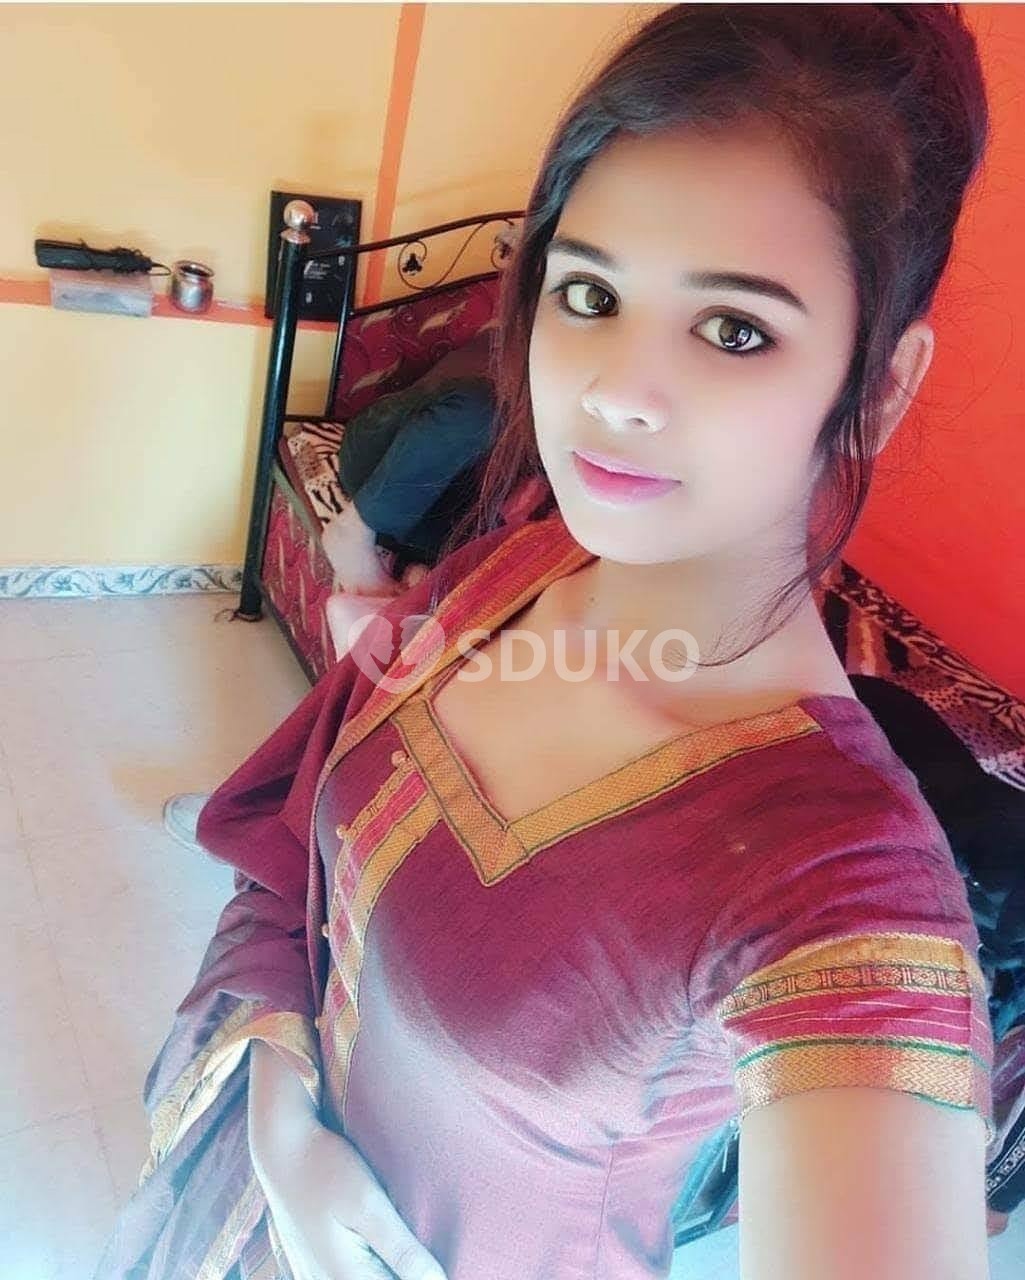 (ELECTRONIC CITY) TODAY LOW PRICE 100% GENUINE SERVICE SAFE AND SECURE HOT COLLEGE GIRL HOUSEWIFE AUNTIES AVAILABLE ANYT